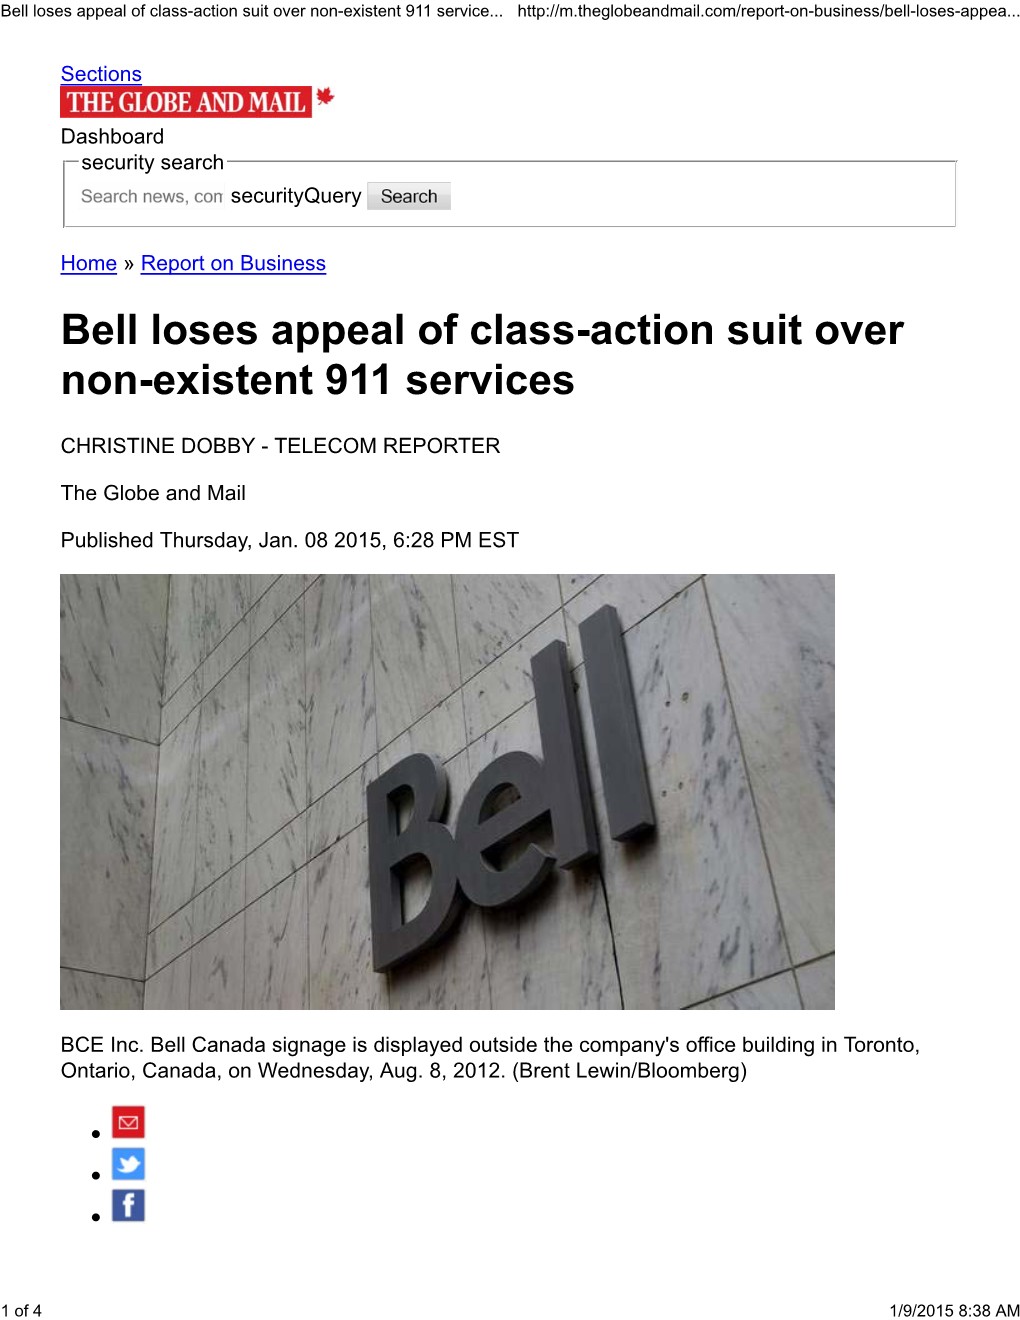 Bell Loses Appeal of Class-Action Suit Over Non-Existent 911 Services